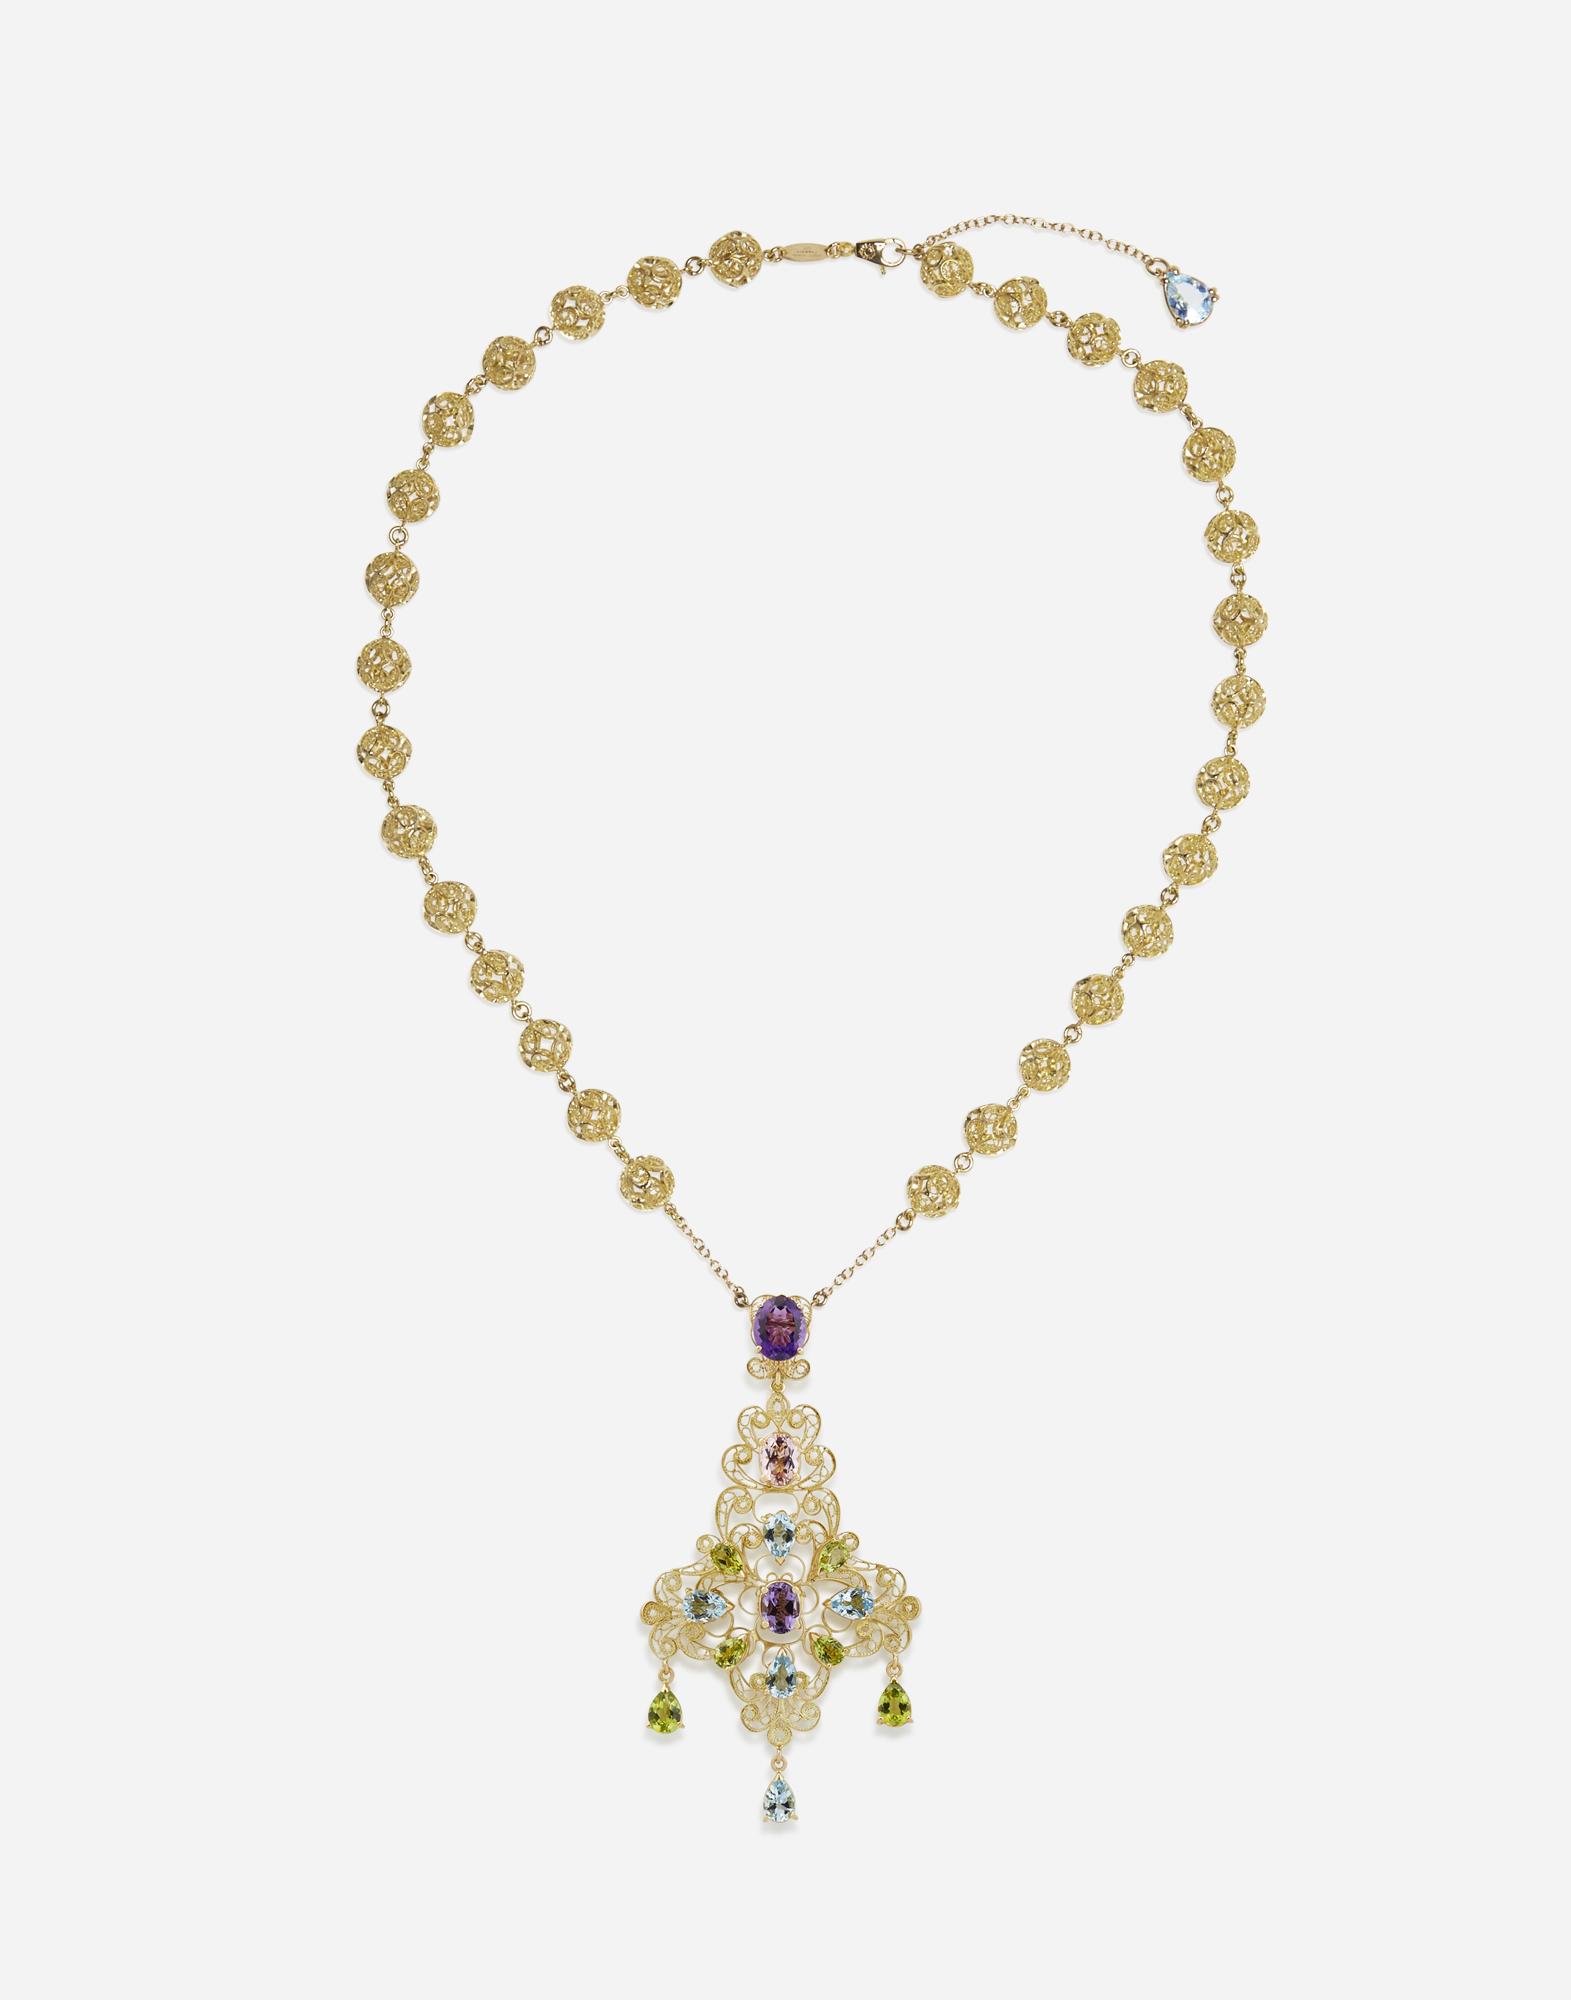 Pizzo necklace in yellow gold filigree with amethysts, aquamarines, peridots and morganite in Gold